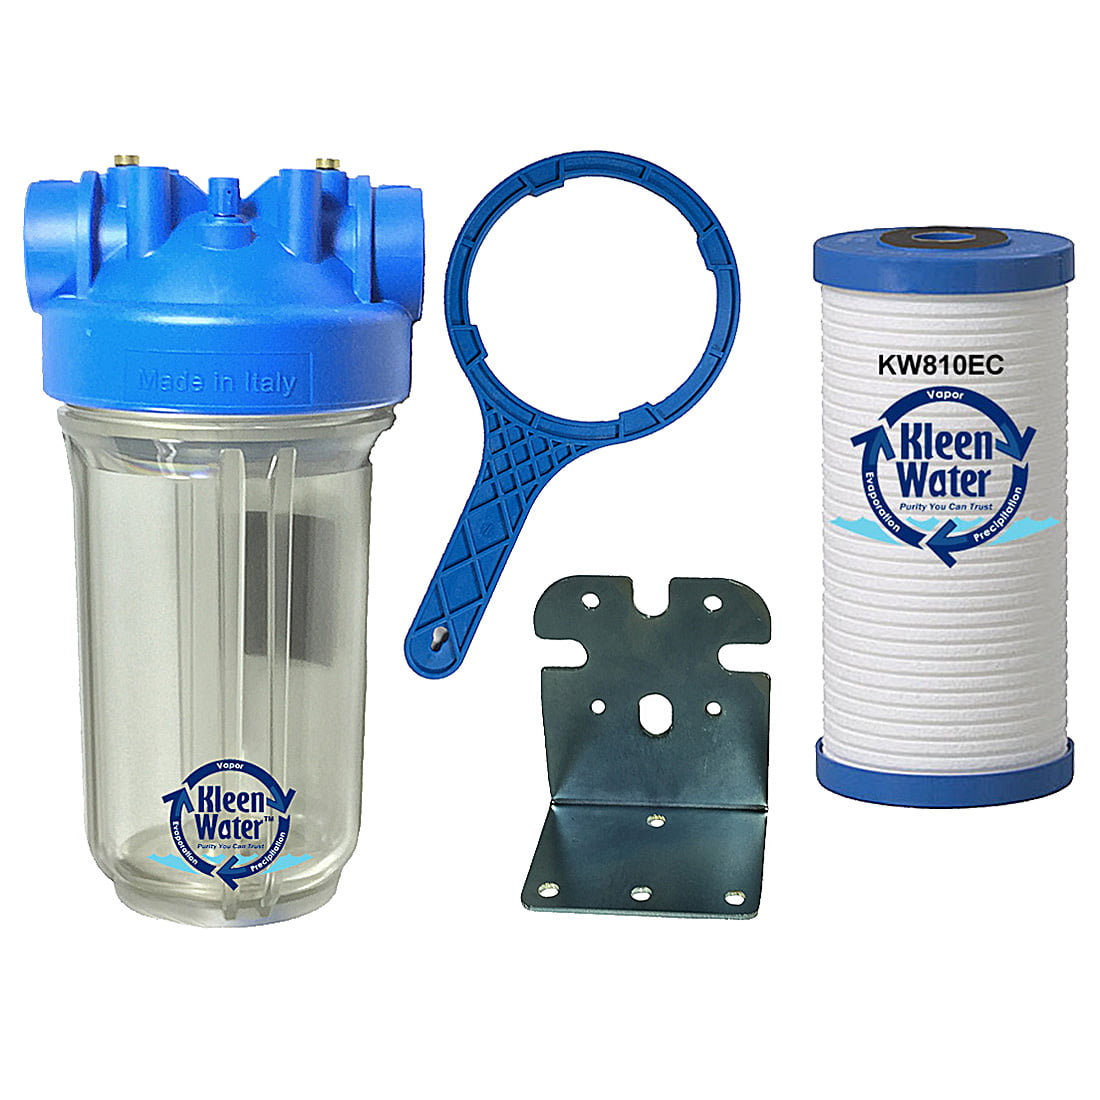 Details about   Dual 4.5" x 10" Big Blue Filter Housing with Fluoride Chlorine Reducing Filters